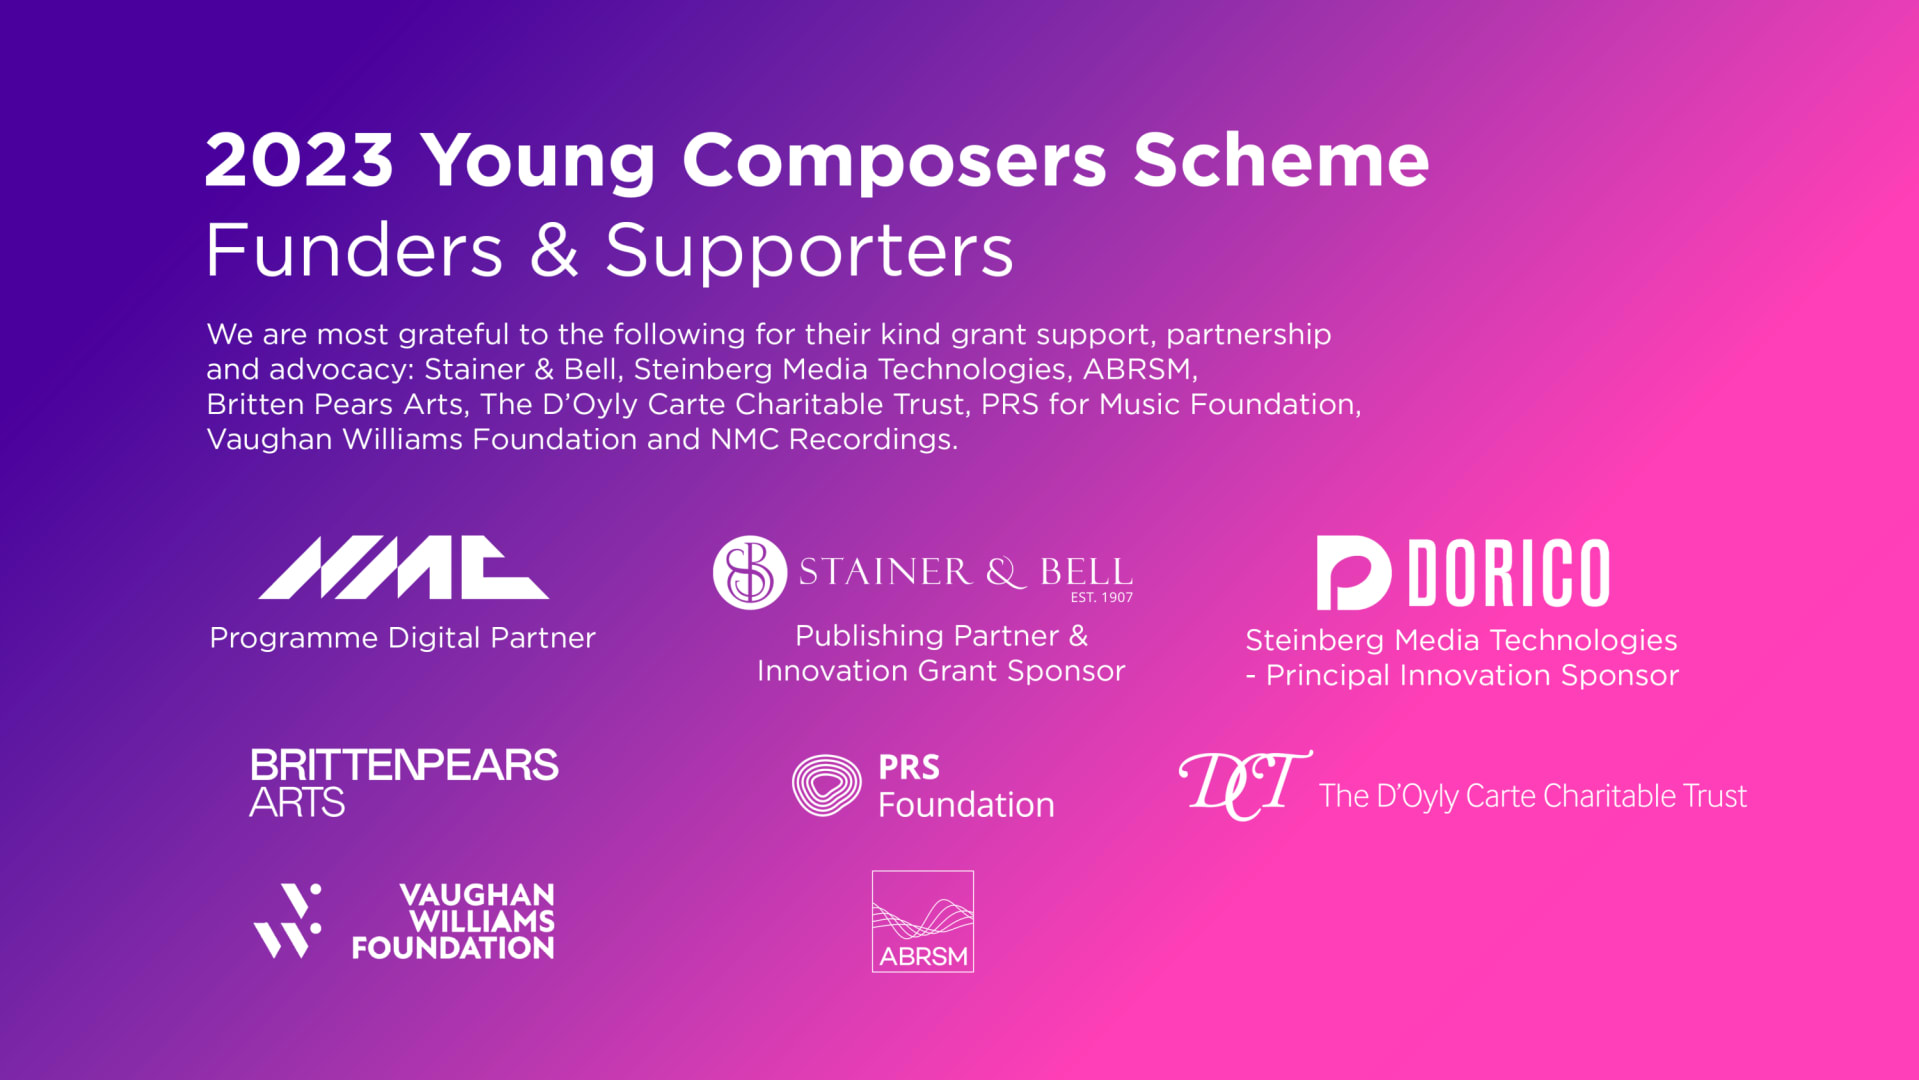 Graphic acknowledging the supporters of the 2023 Young Composers scheme including NMC, Dorico, ABRSM, Vaughan Williams Trust, D'Oyly Carte Trust, Britten Pears Arts and PRS Foundation